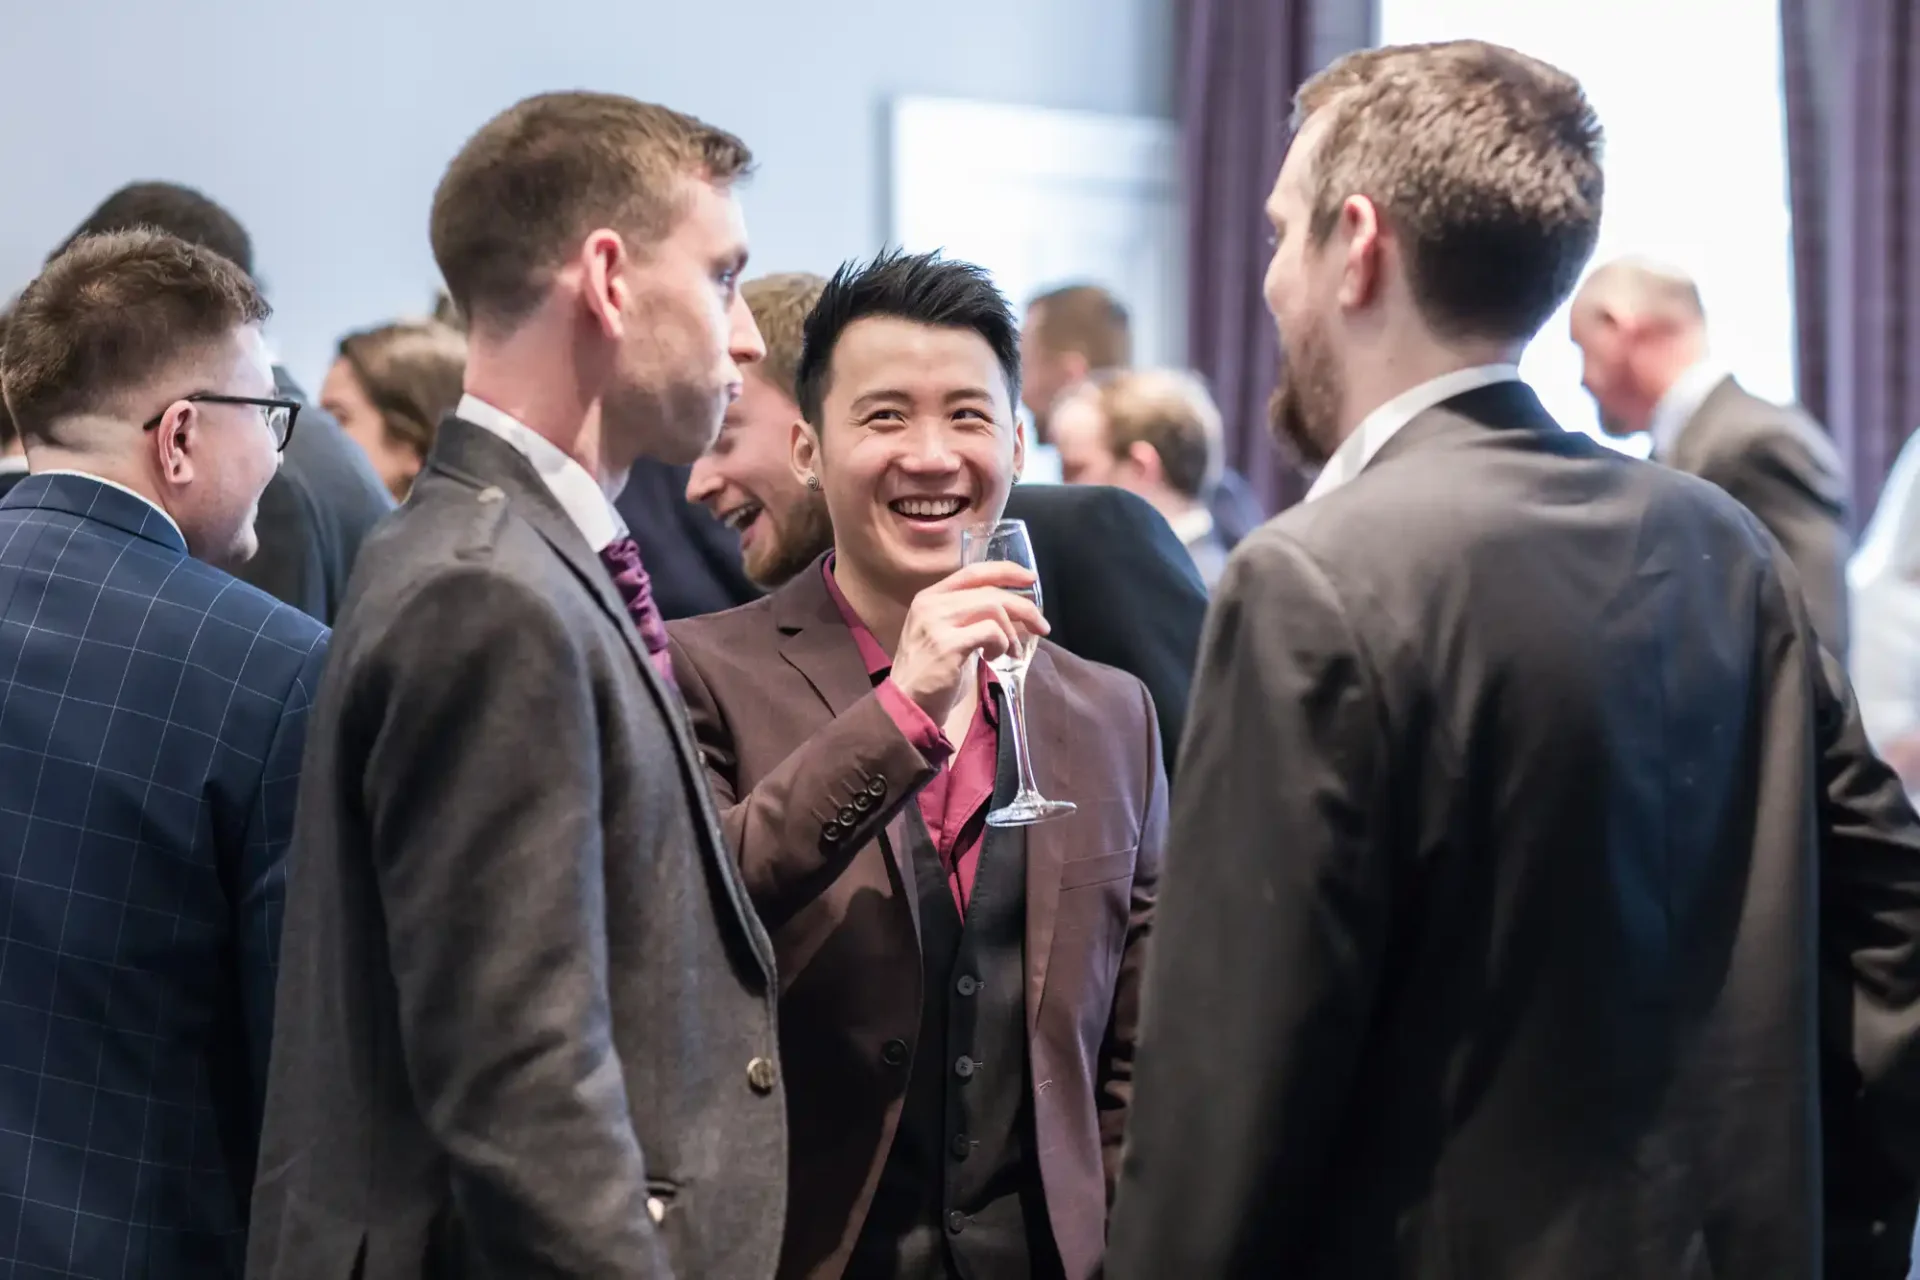 Group of men in formal attire engaging in conversation at a networking event, with one man smiling and holding a drink.